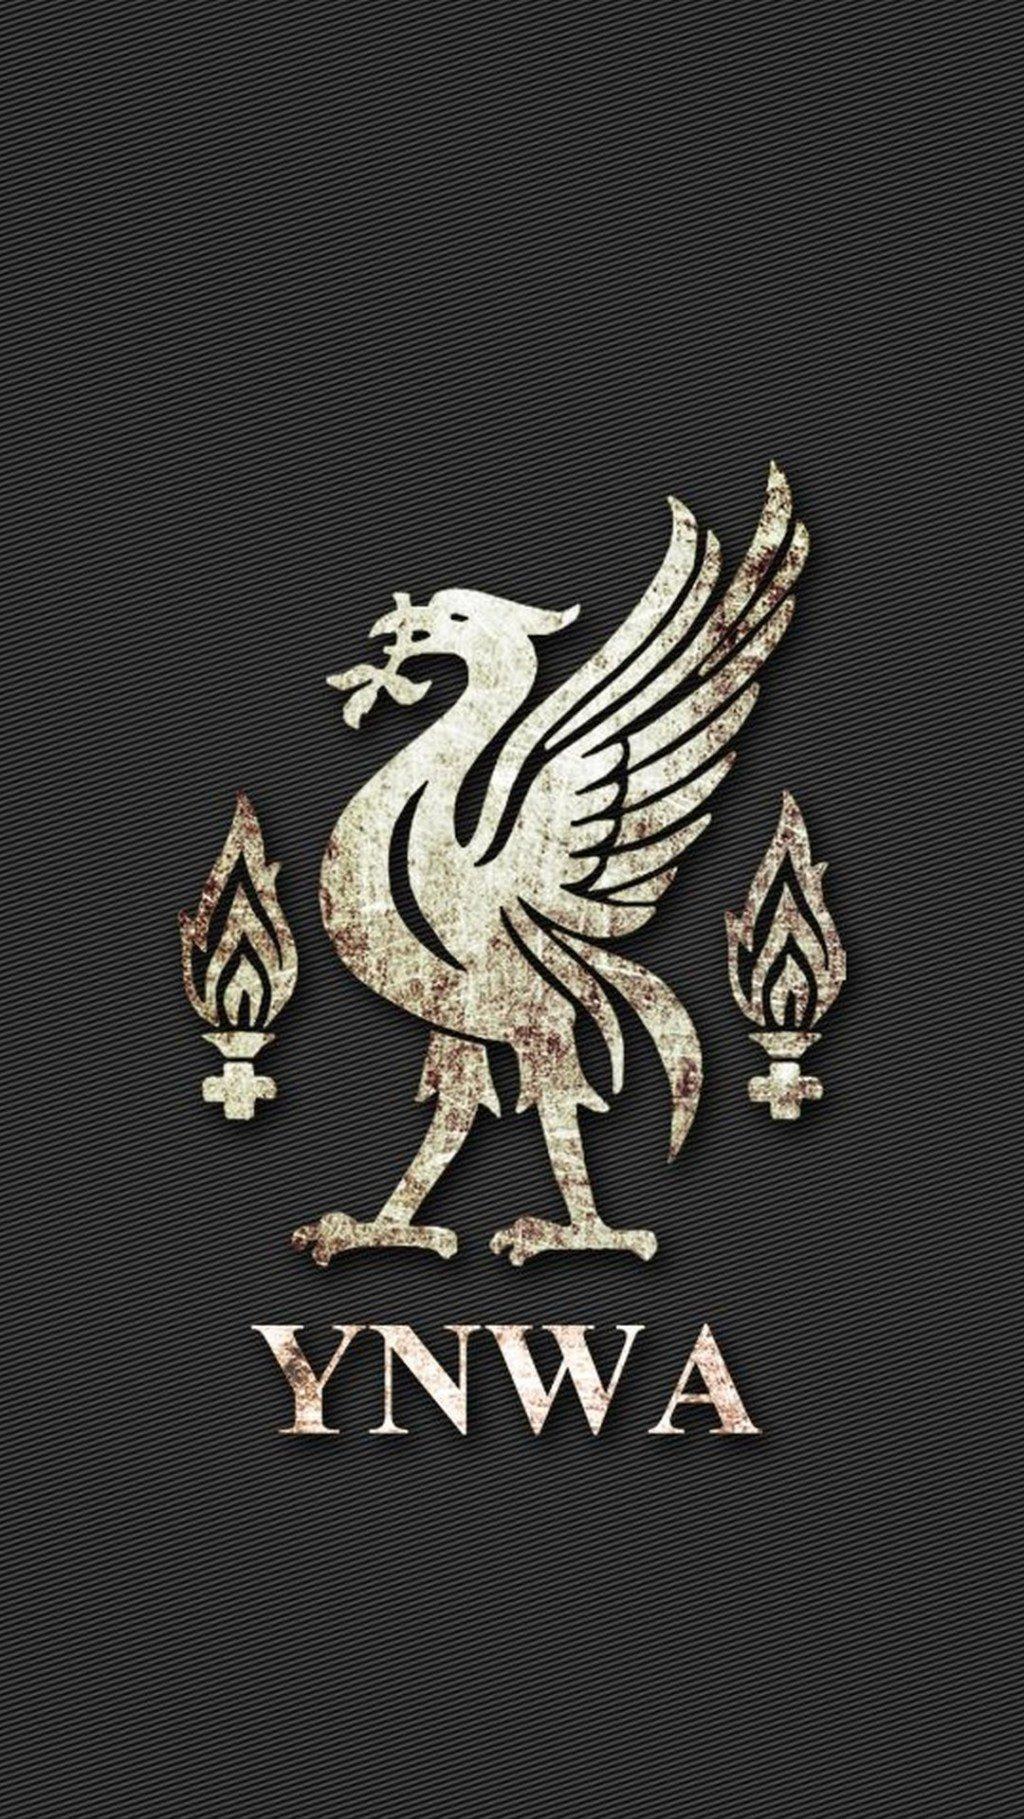 FC Wallpaper on X Liverpool HD Wallpaper For iPhone